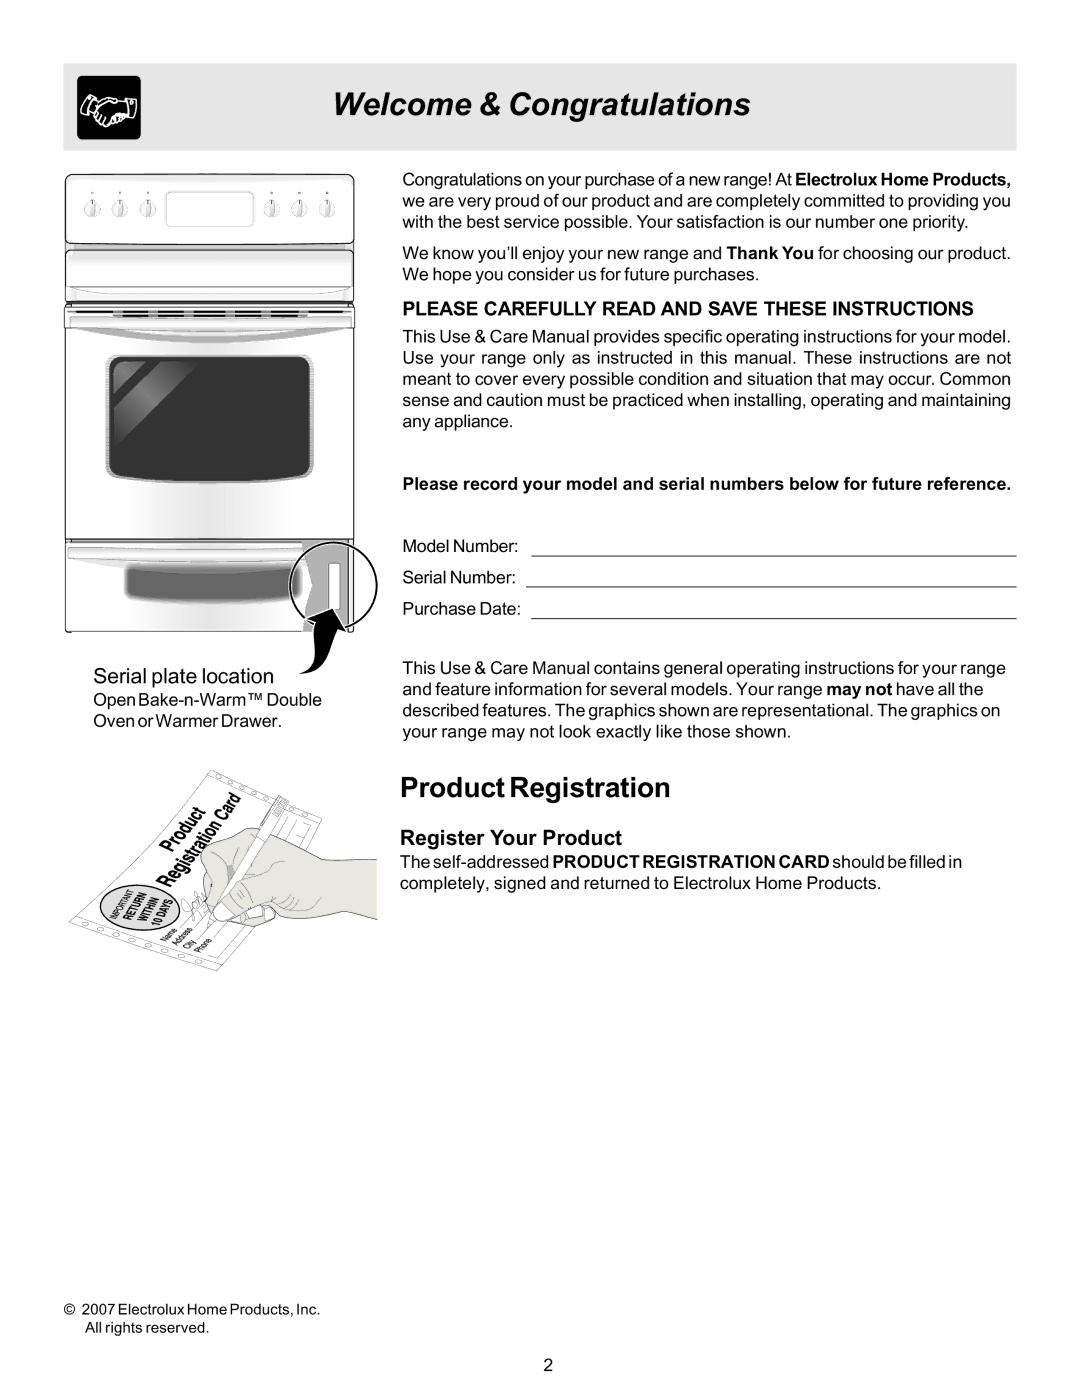 Frigidaire ES530 manual Welcome & Congratulations, Register Your Product 